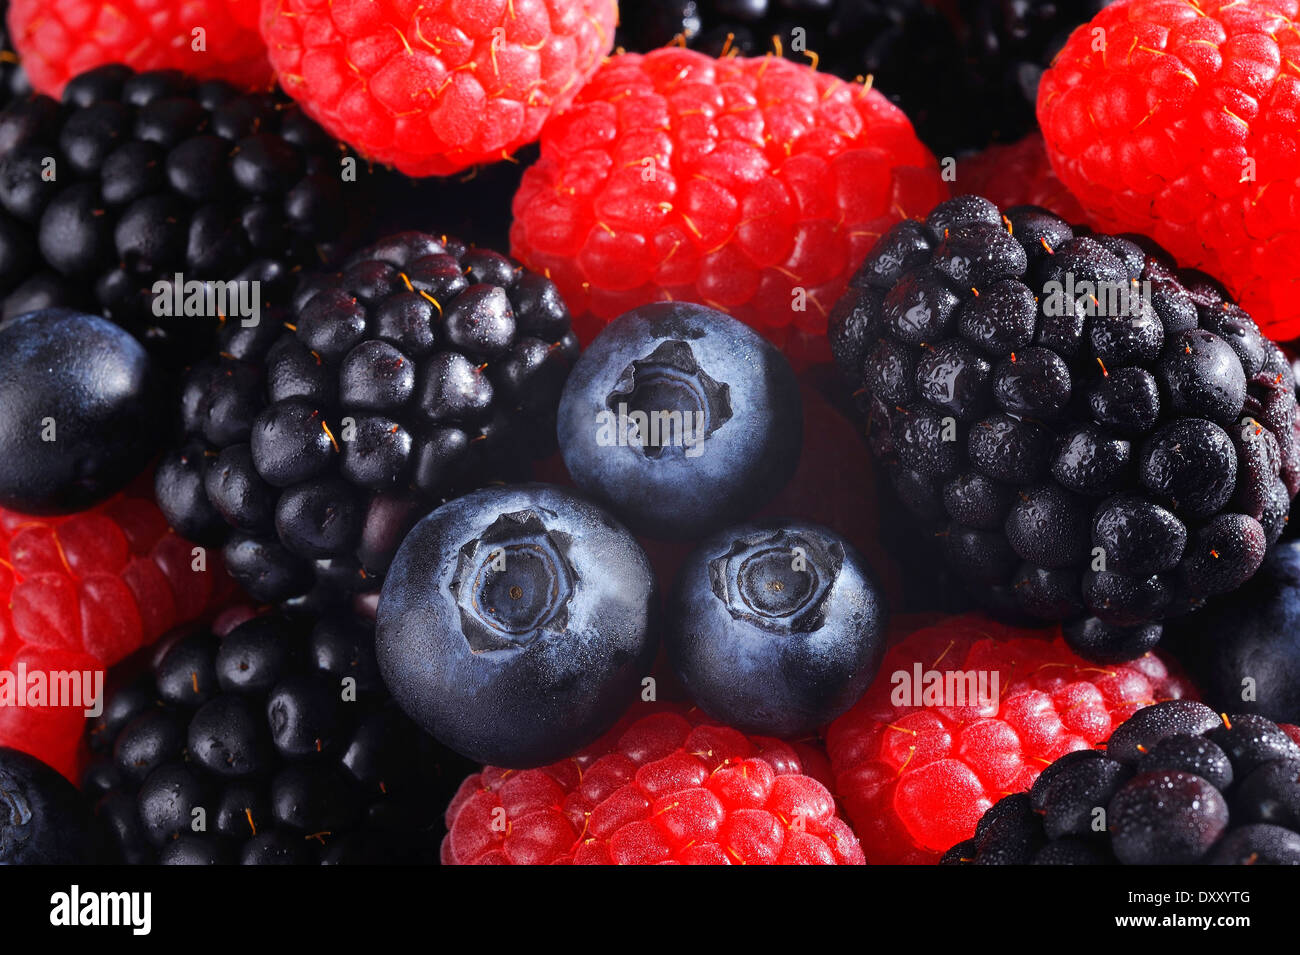 Mixed berries cool background Stock Photo